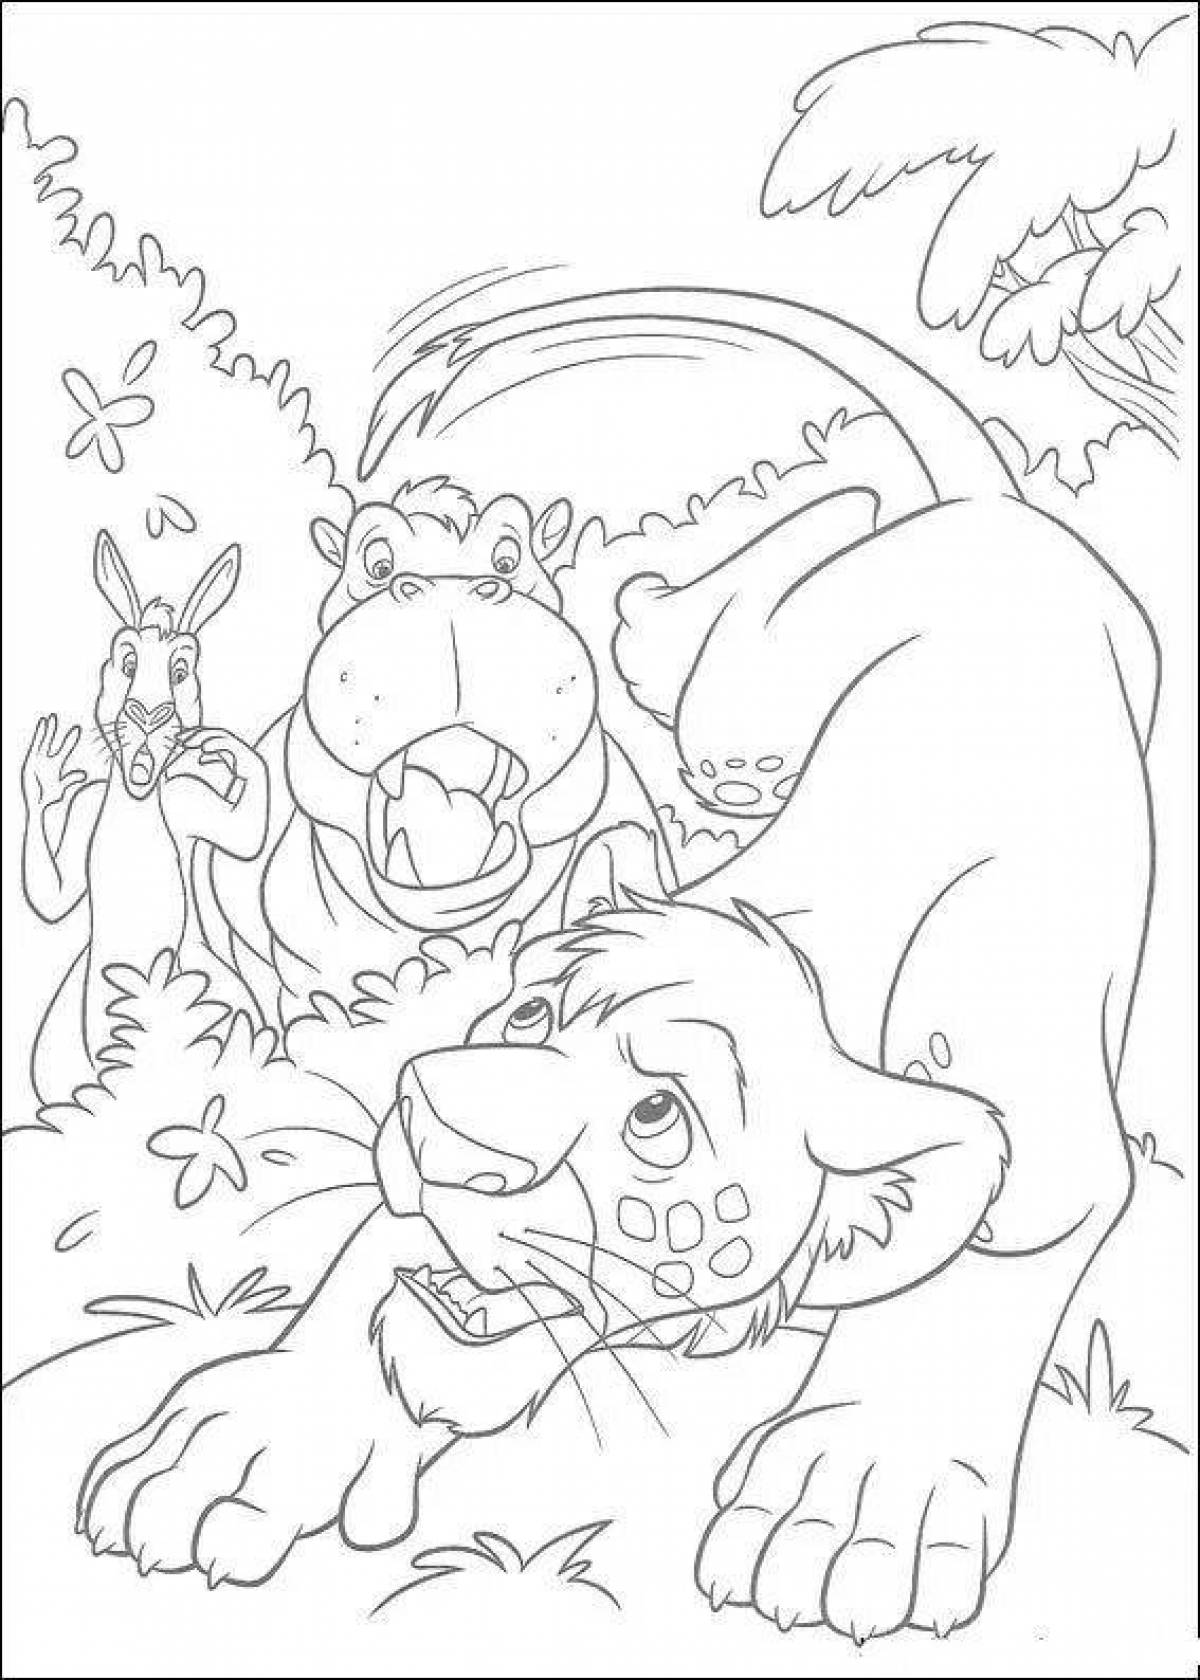 Colorful big adventure coloring page